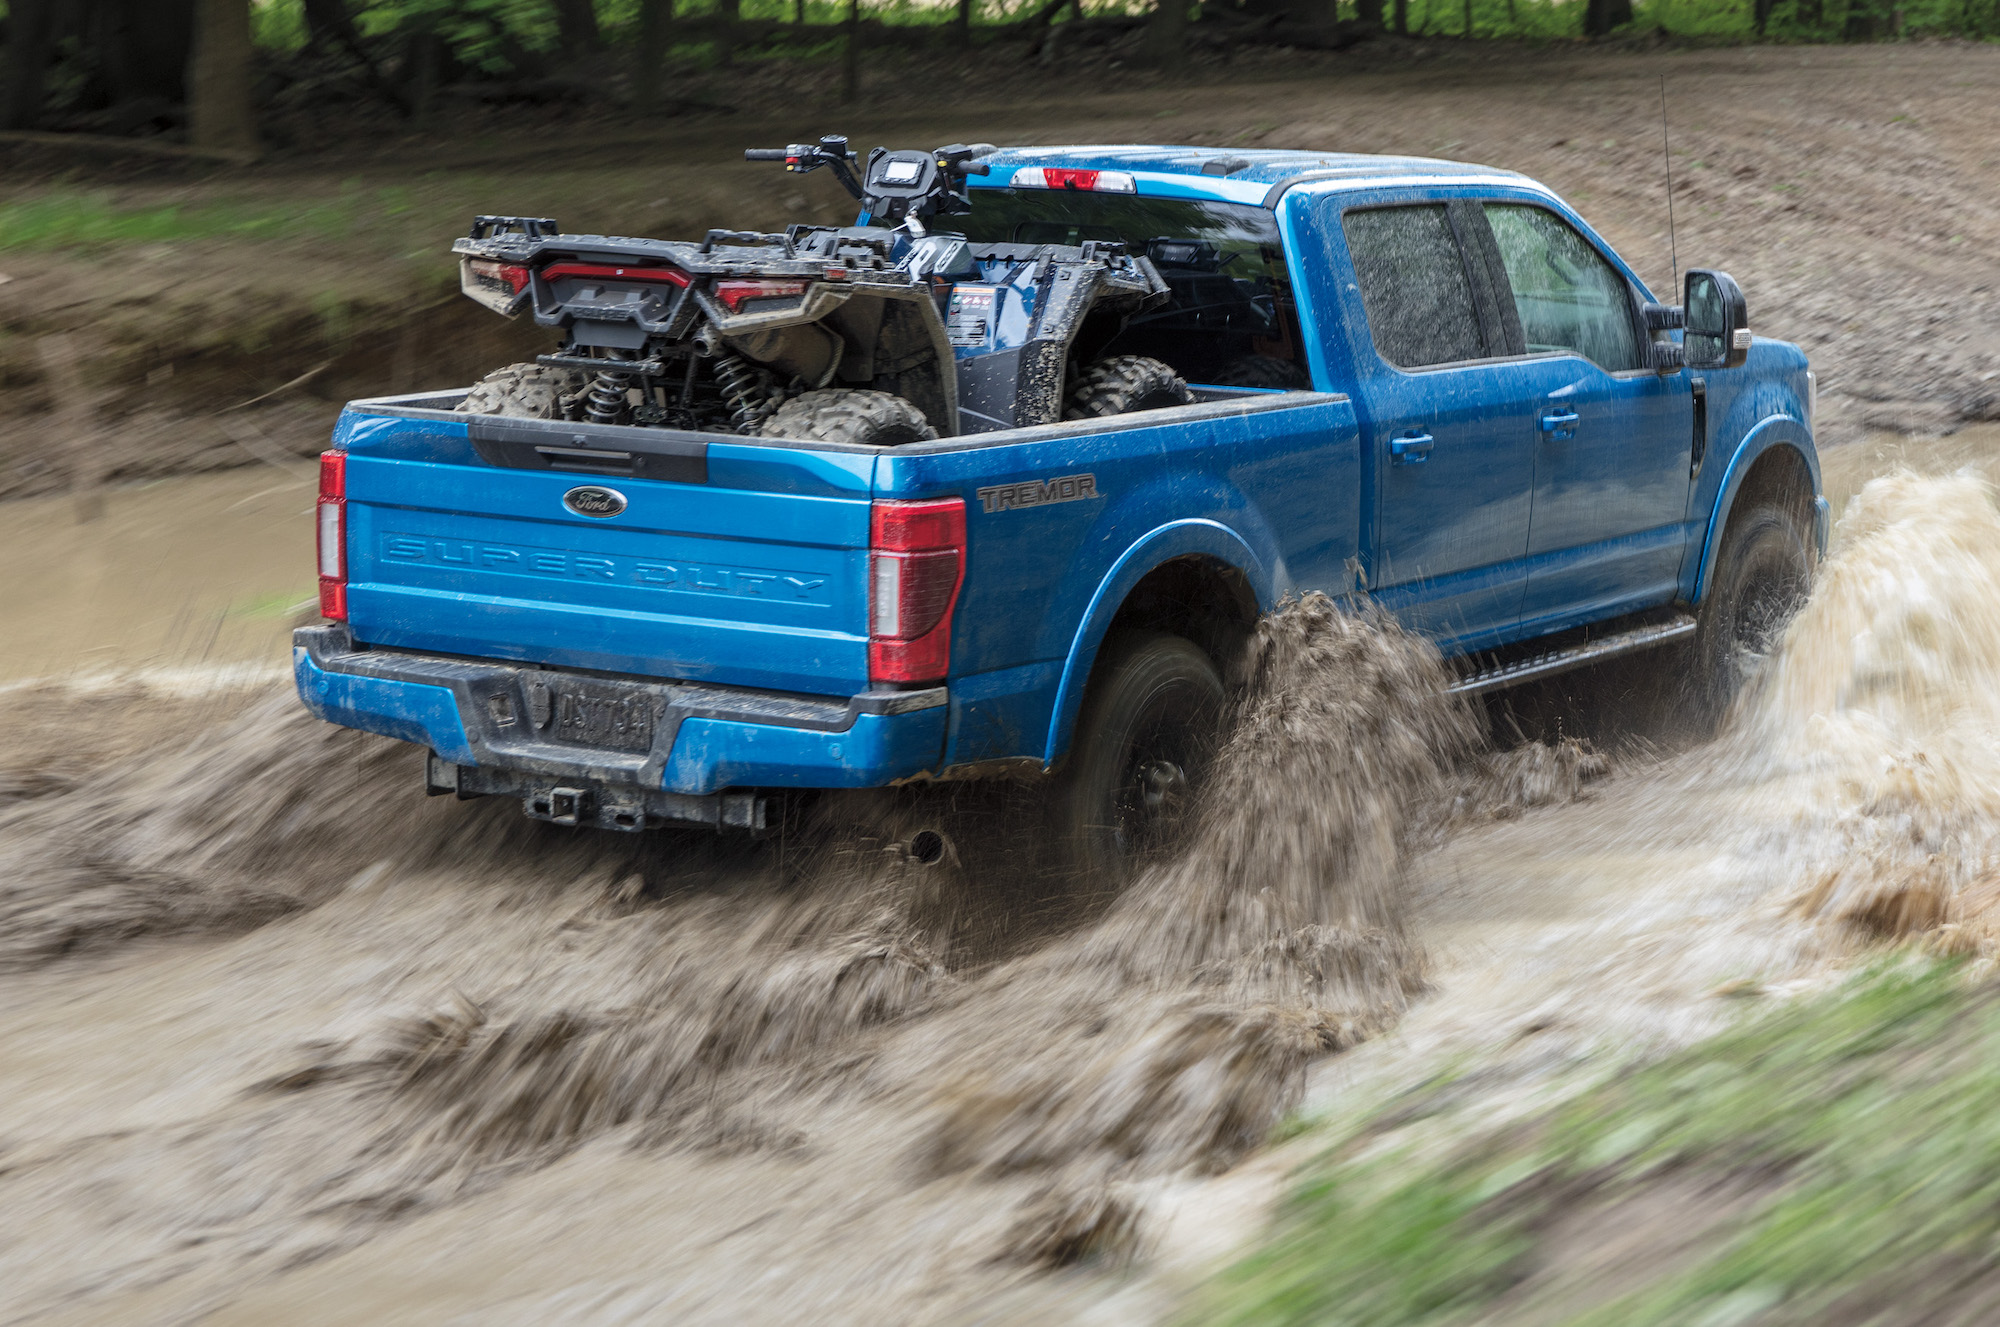 The 2021 Ford F-250 Failed to Address Any of Consumer Reports' Complaints